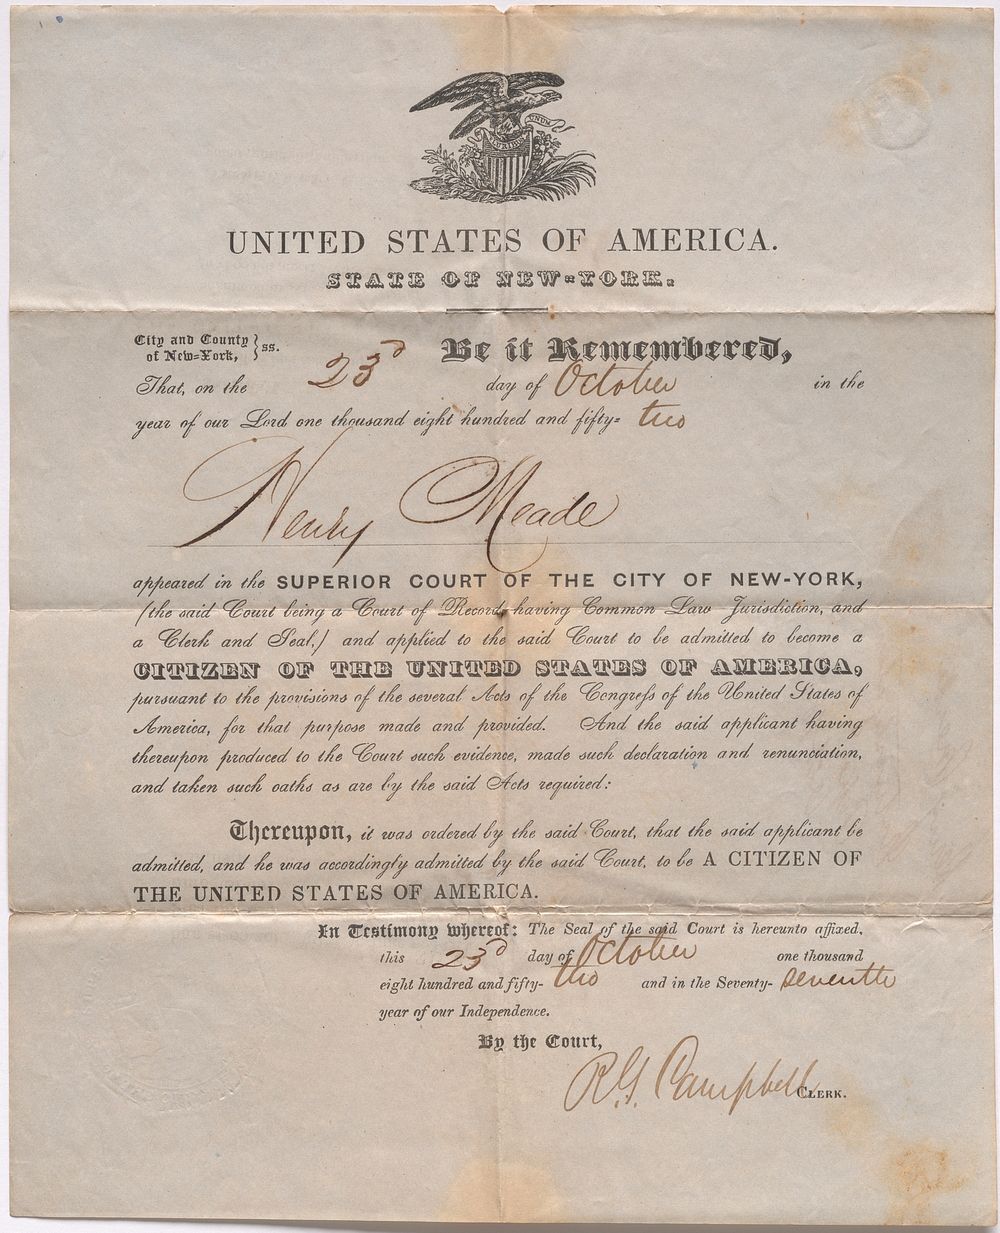 Naturalization papers for Henry Richard Meade